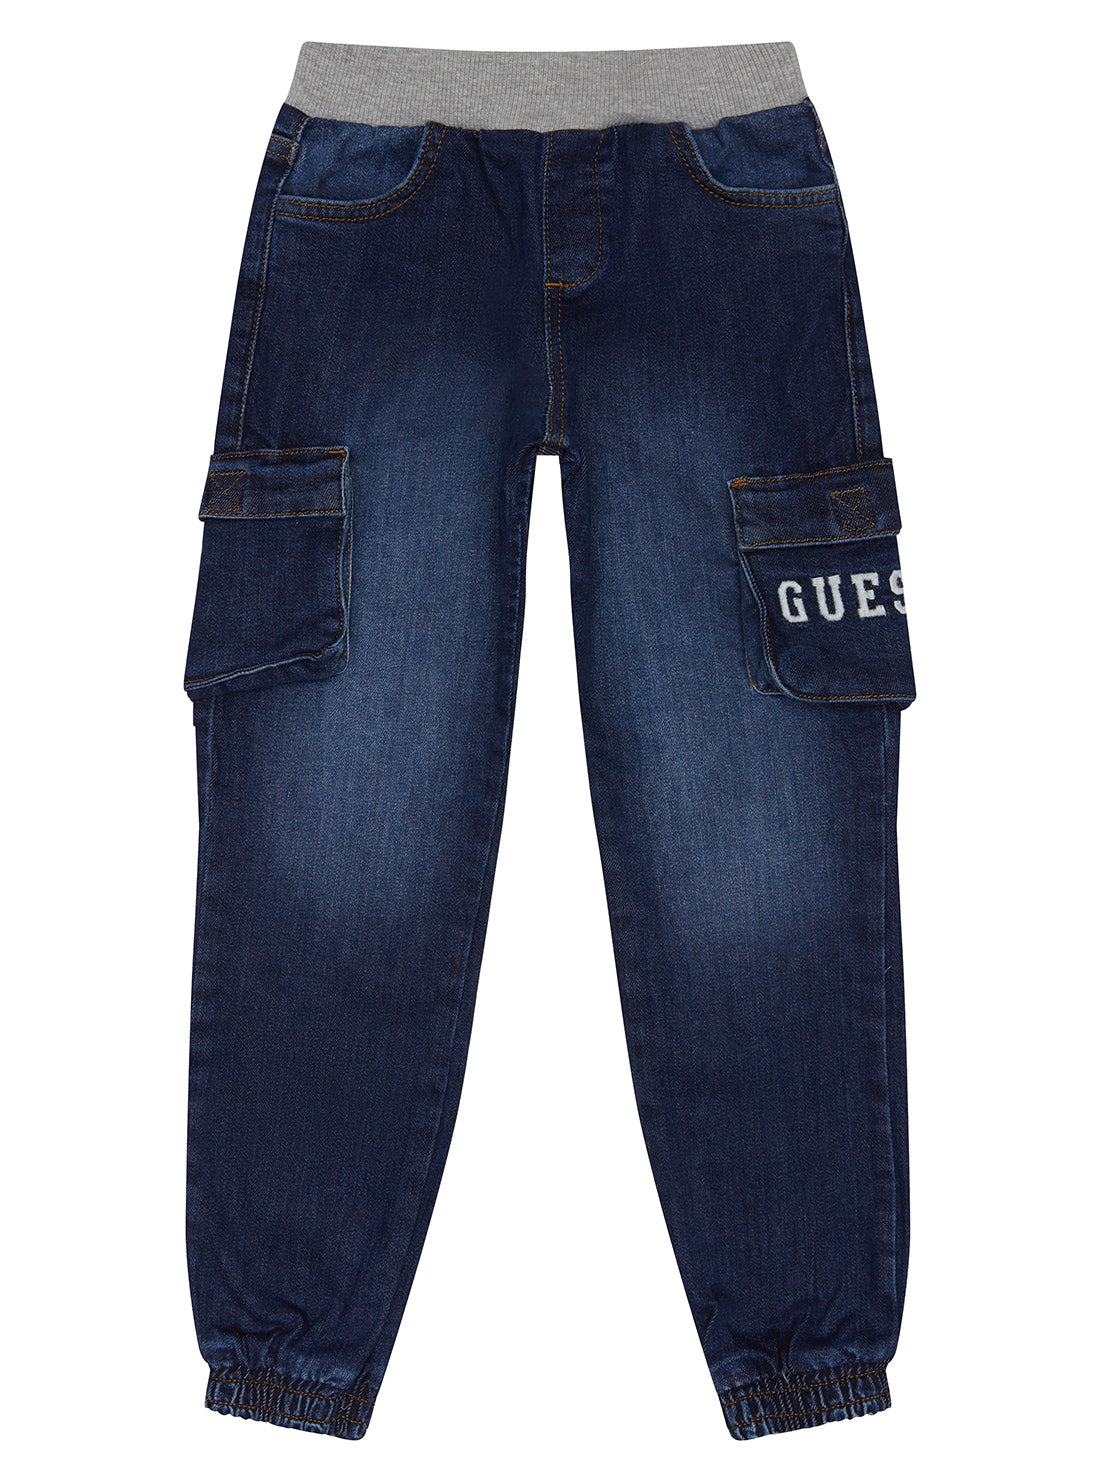 Blue GUESS Denim Pull On Pants (2-7) front view